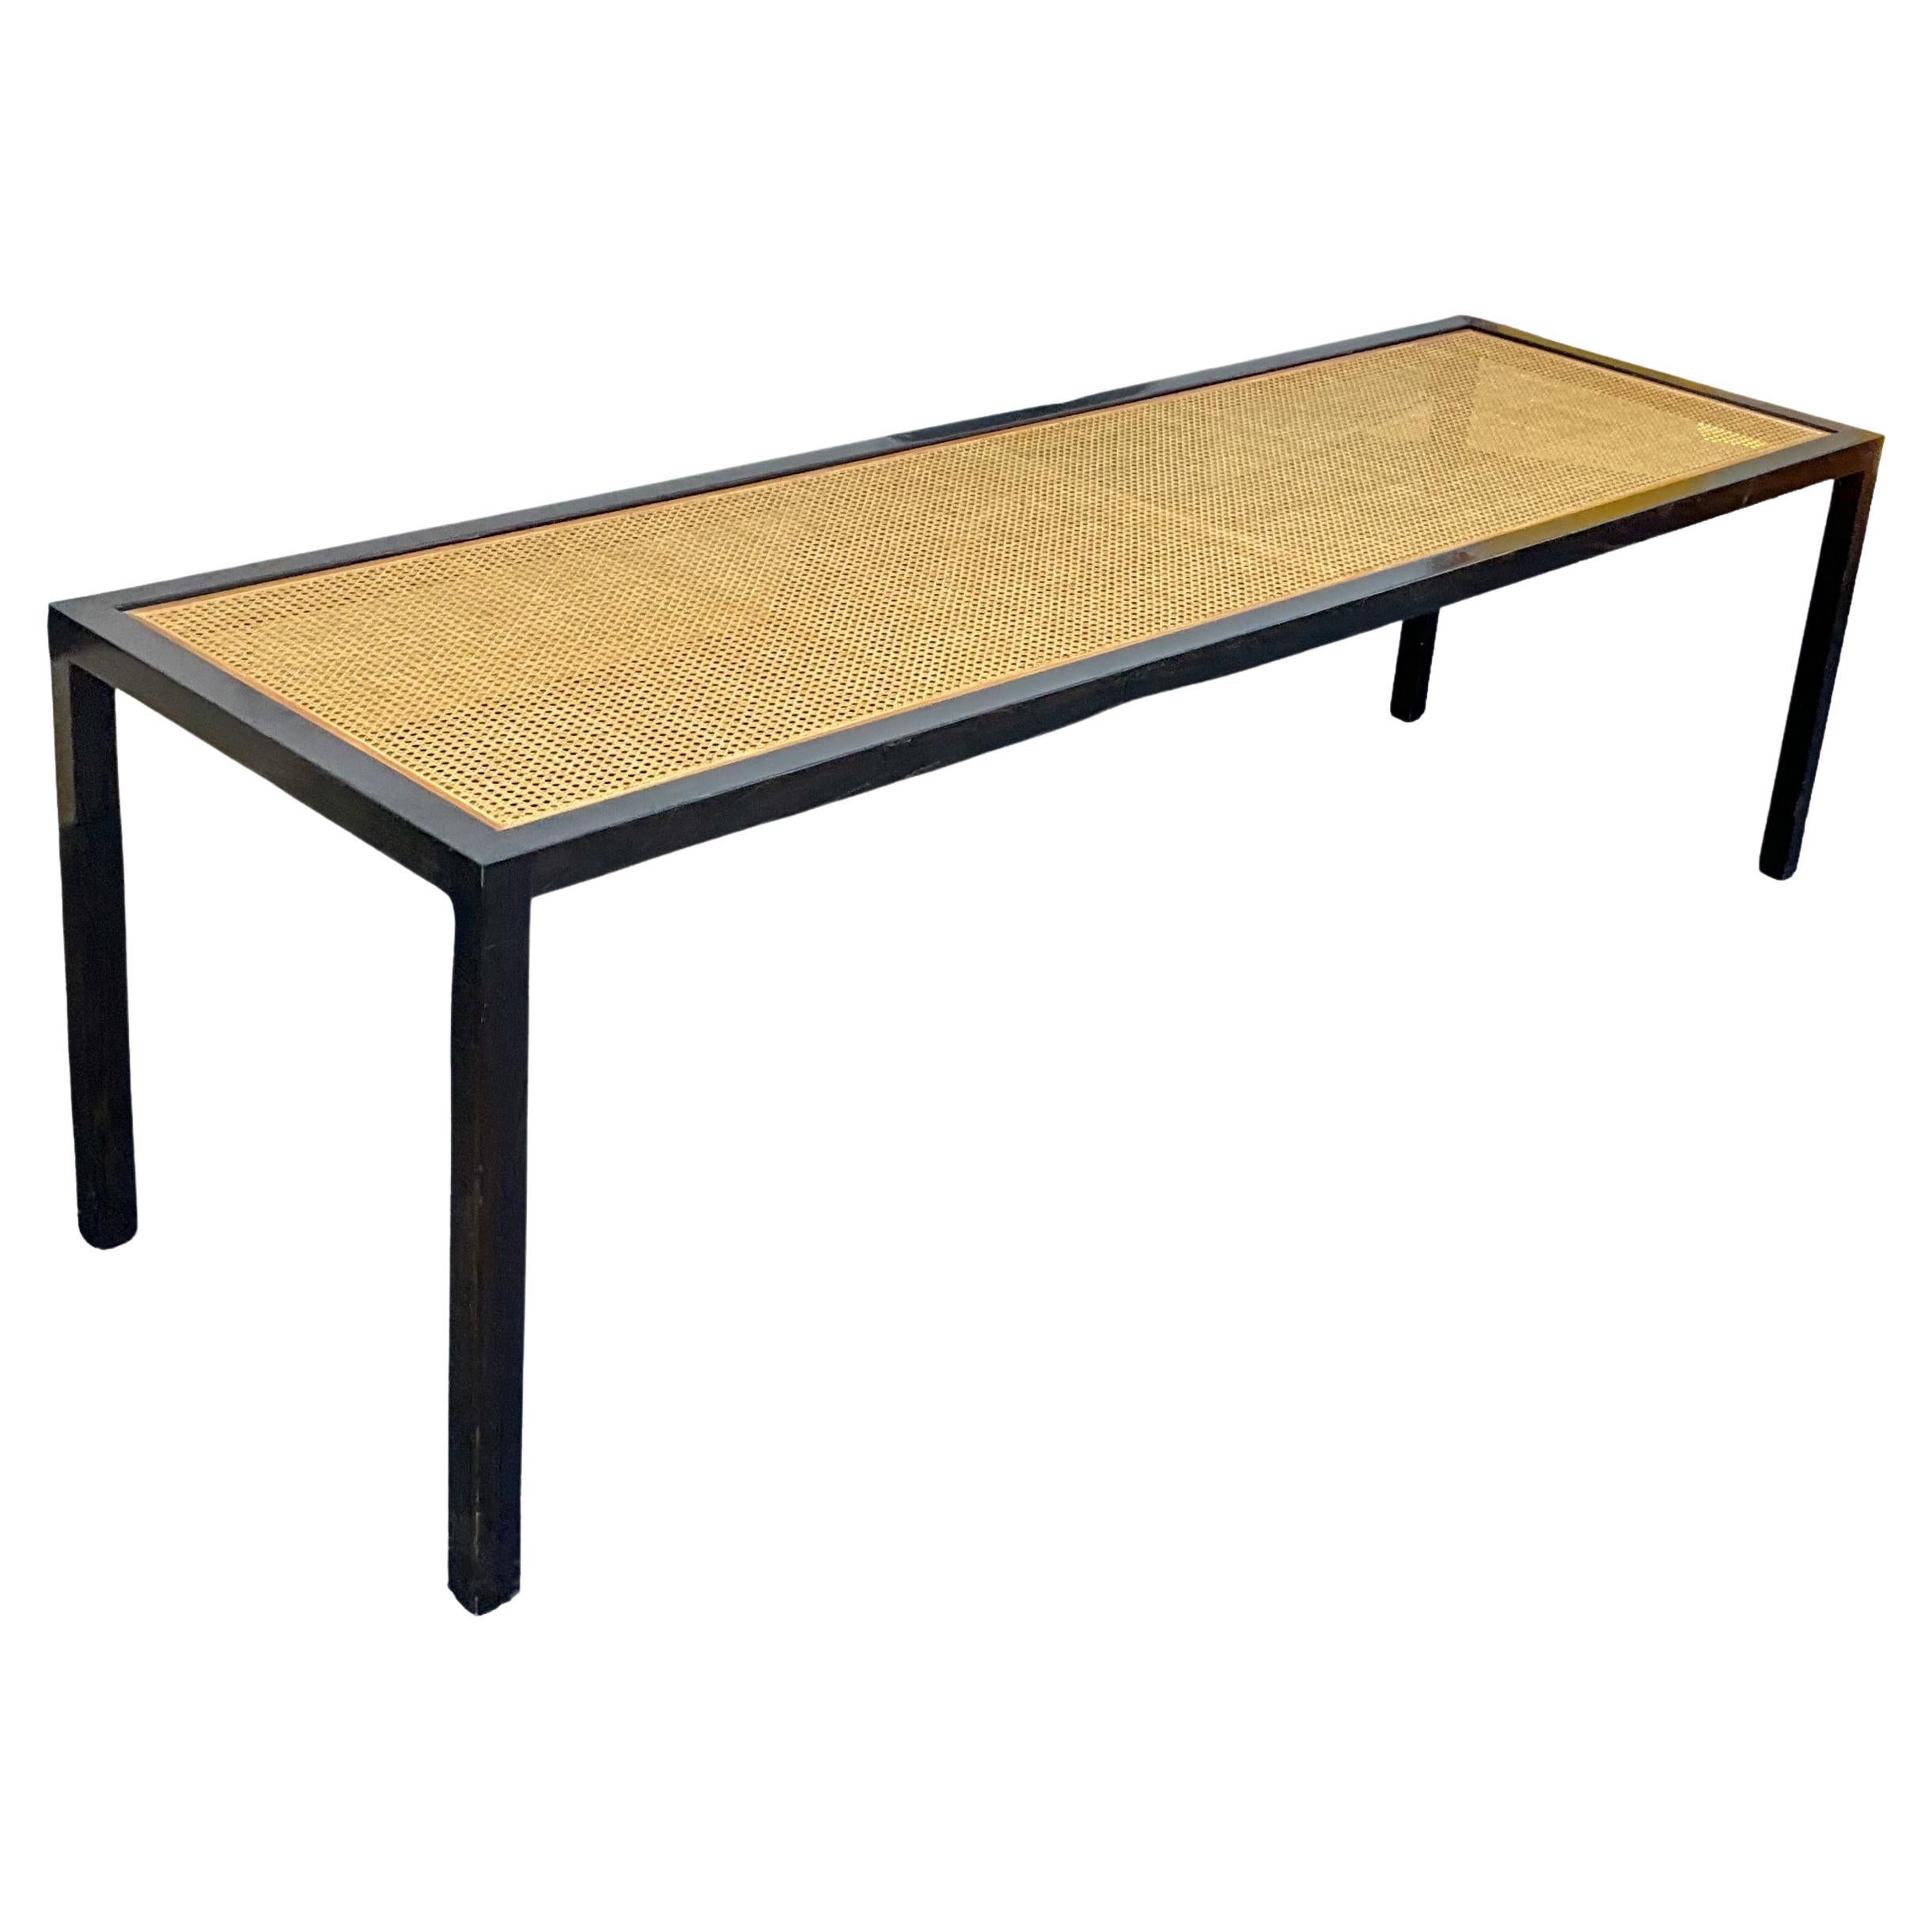 Organic Modern Glass & Cane Top Danny Ho Fong Style Dining Table / Desk 